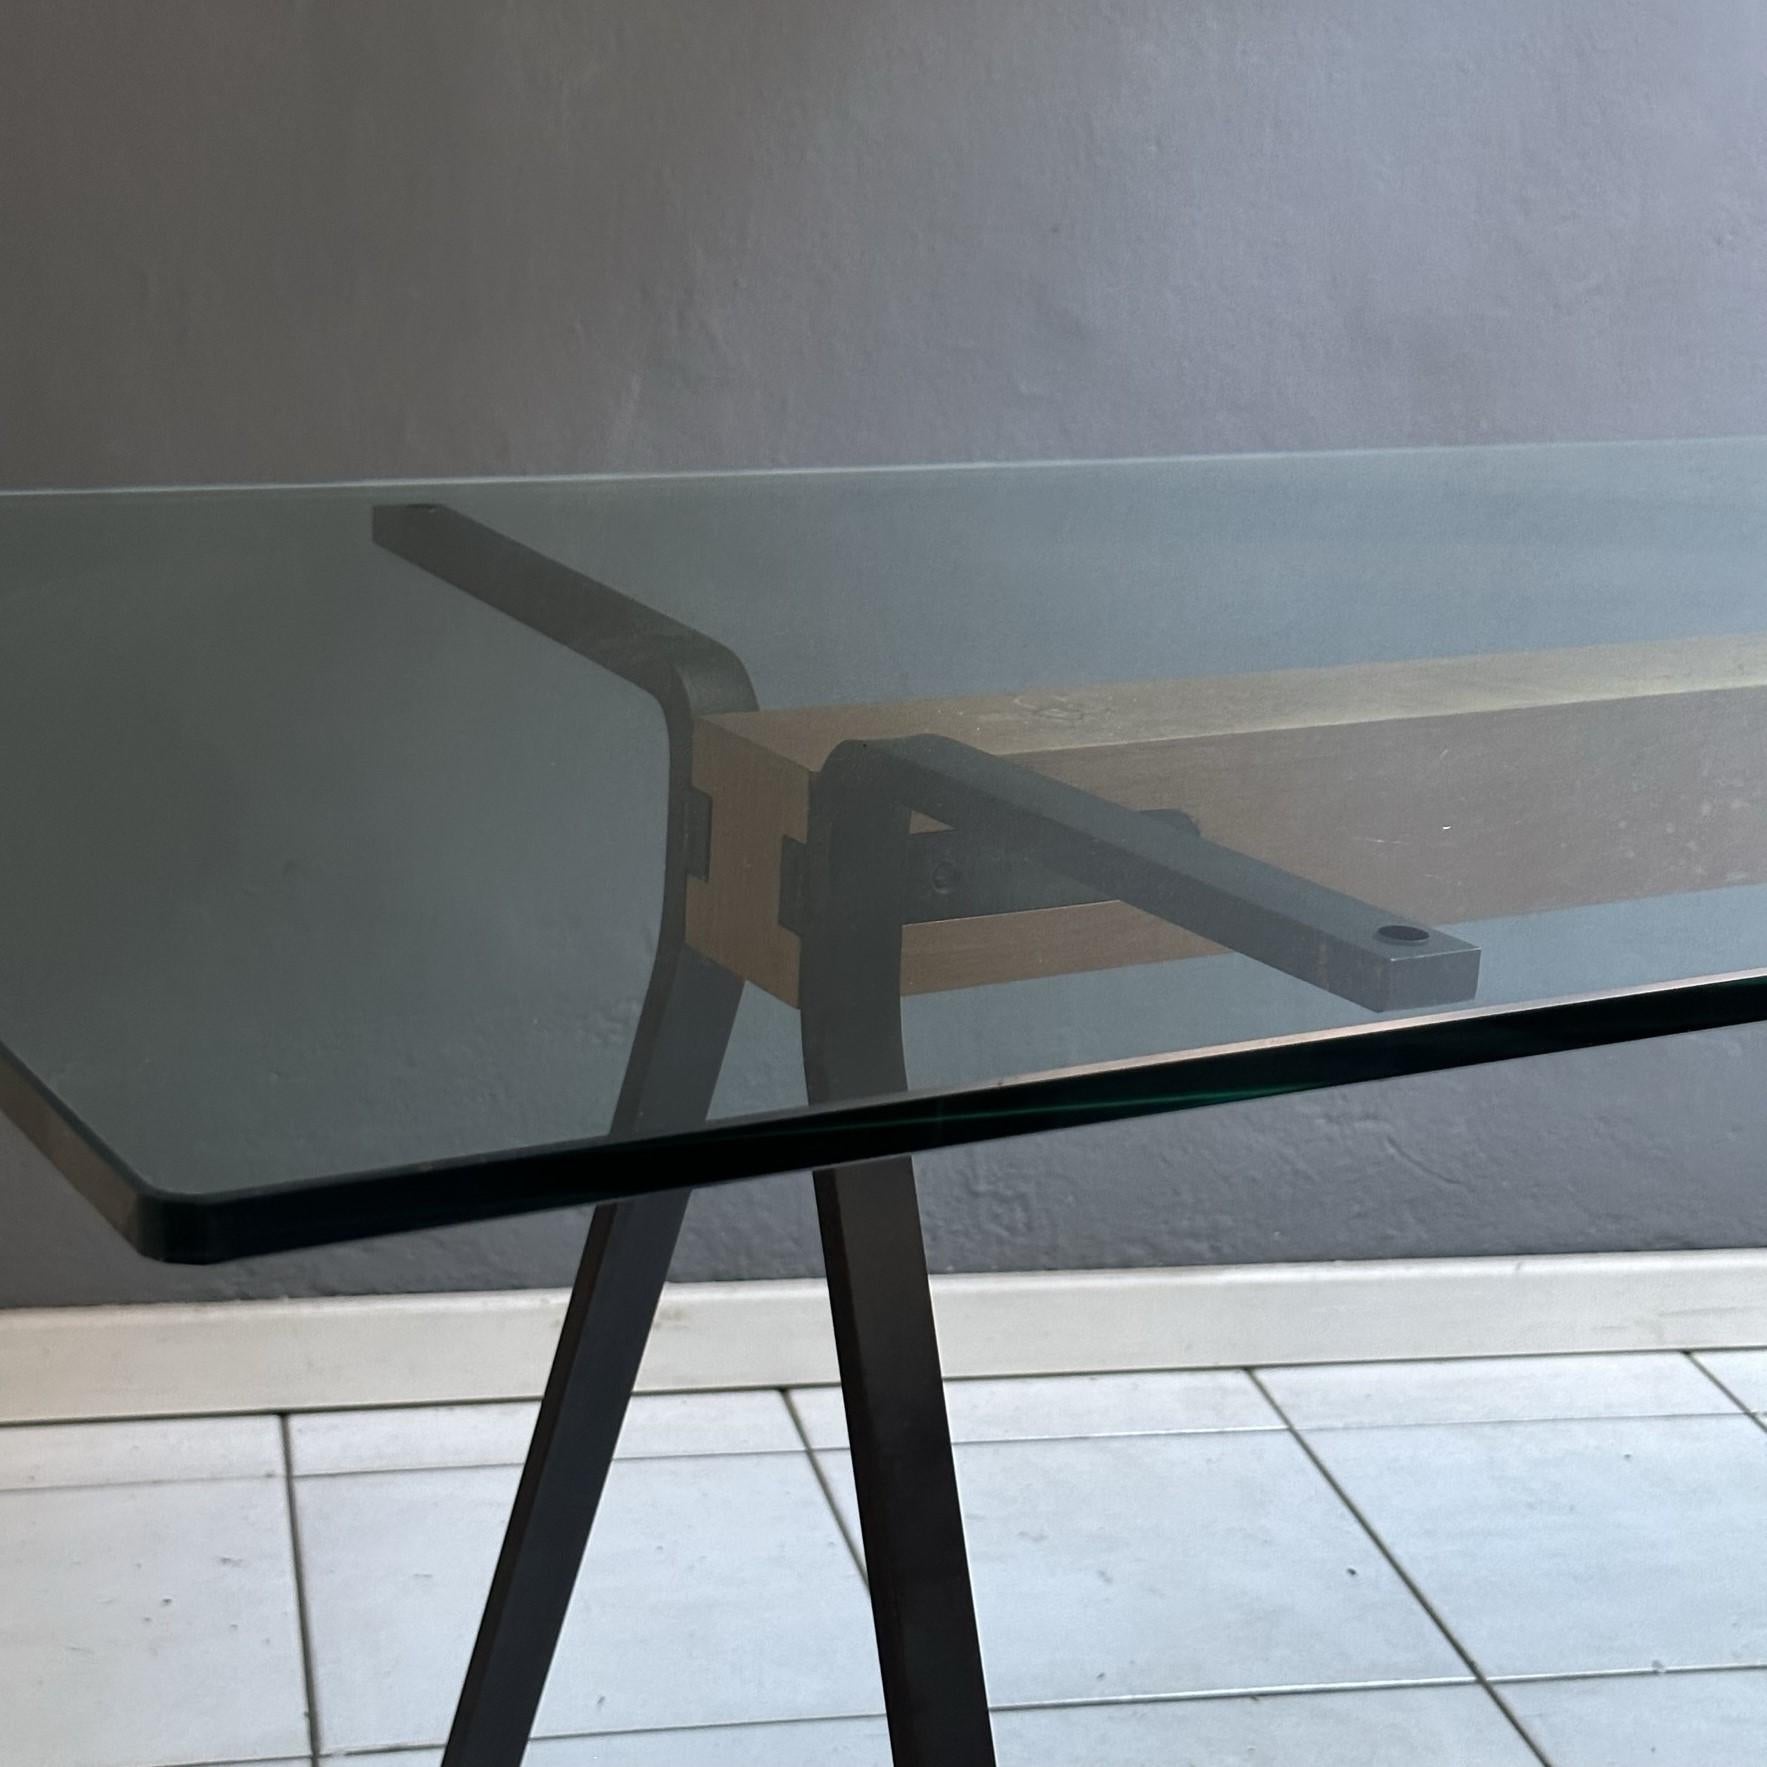 Steel Dining table mod. Frate, designed by Enzo Mari in 1973 produced by Driade For Sale